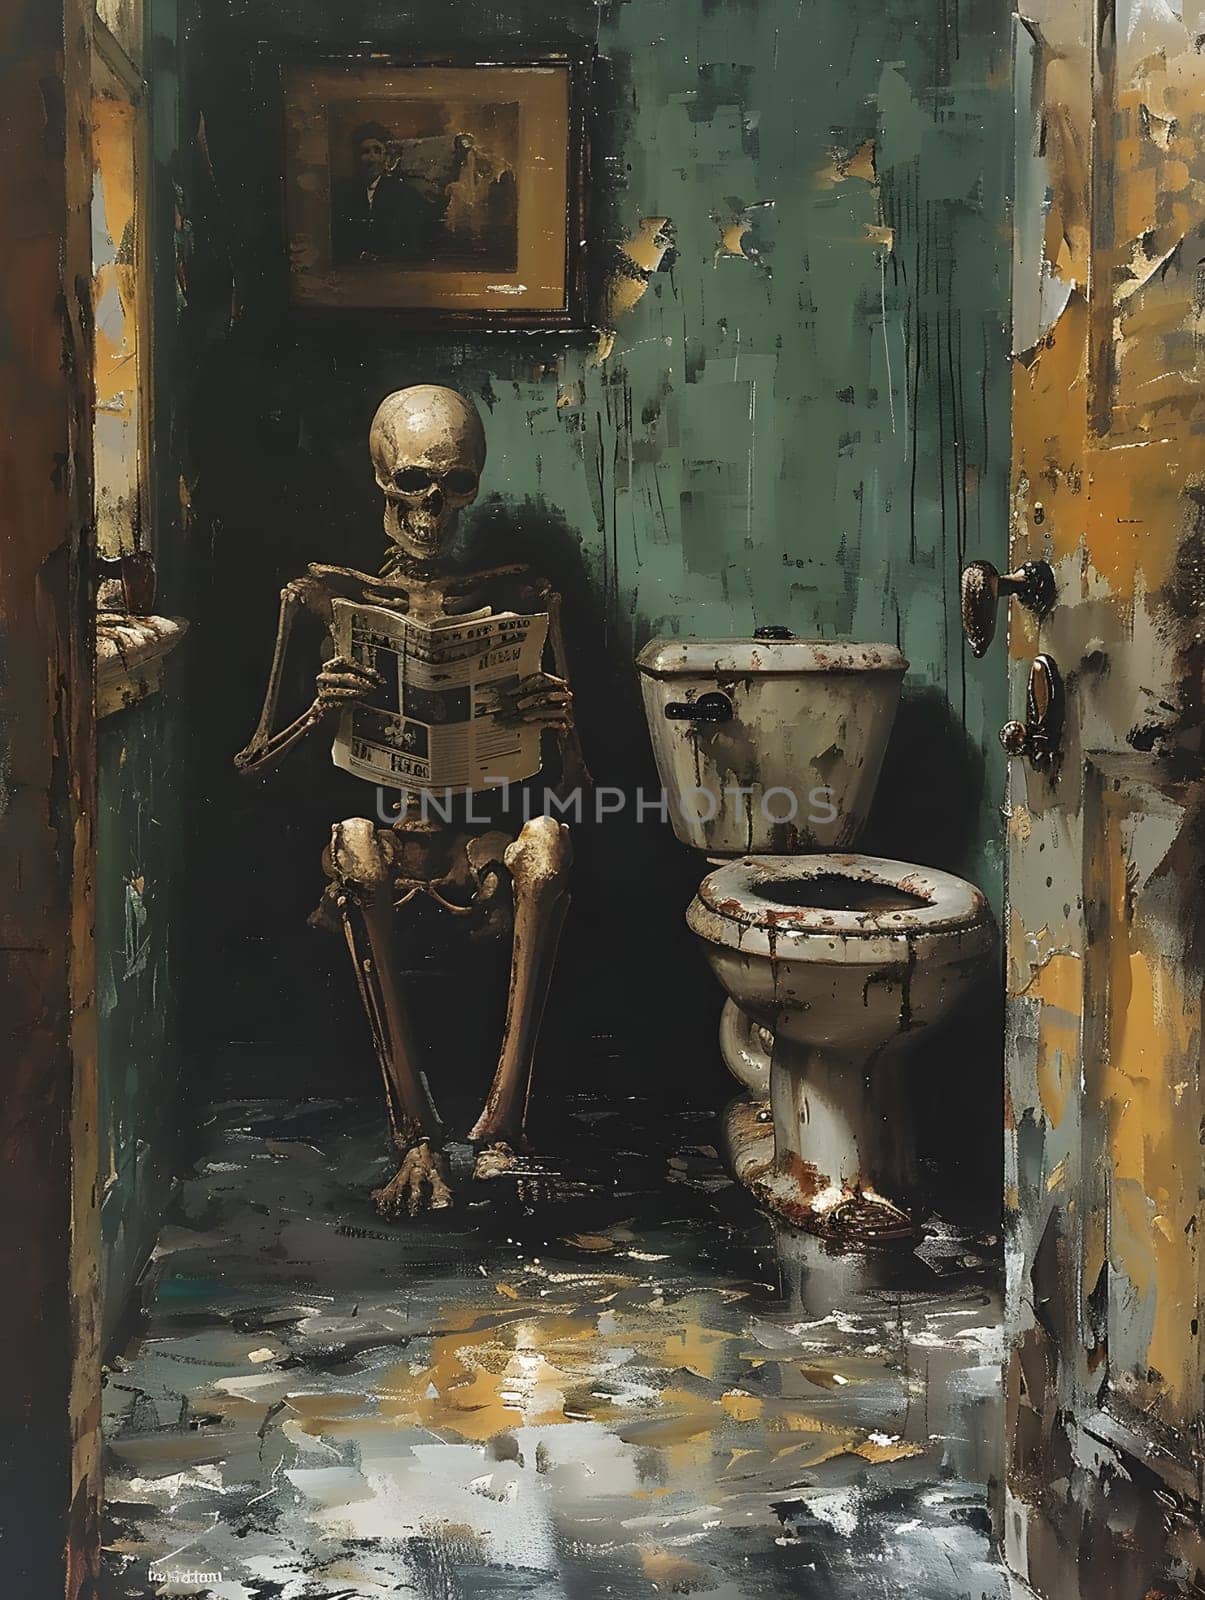 A dark and eerie painting of a skeleton artistically sitting on a wooden toilet, reading a newspaper. The water and building in the background add to the creepy visual arts of the piece